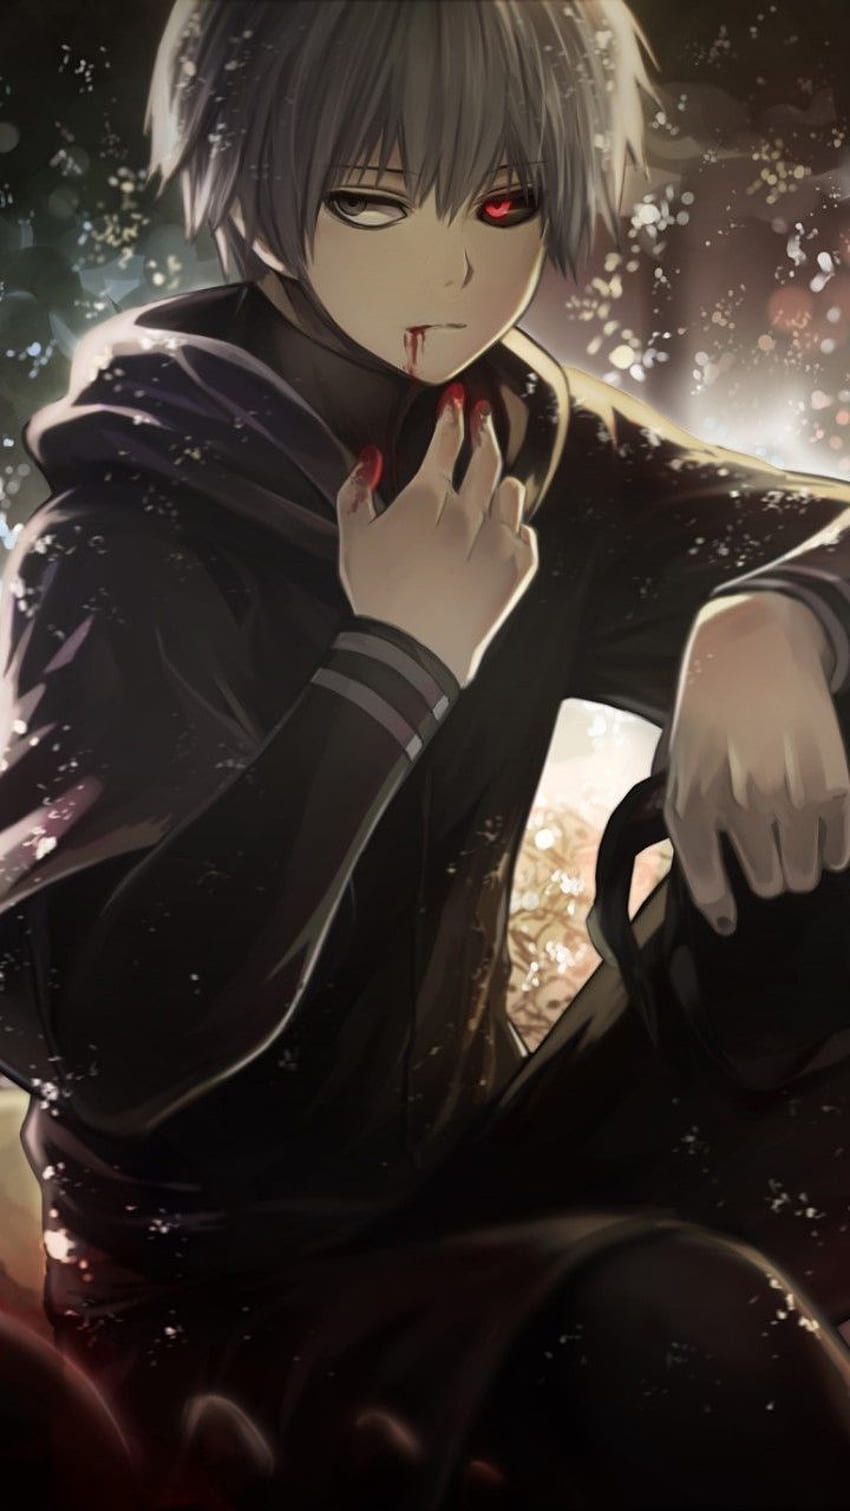 Anime Tokyo Ghoul - Awesome, Very Cool Anime Tokyo Ghoul HD phone wallpaper